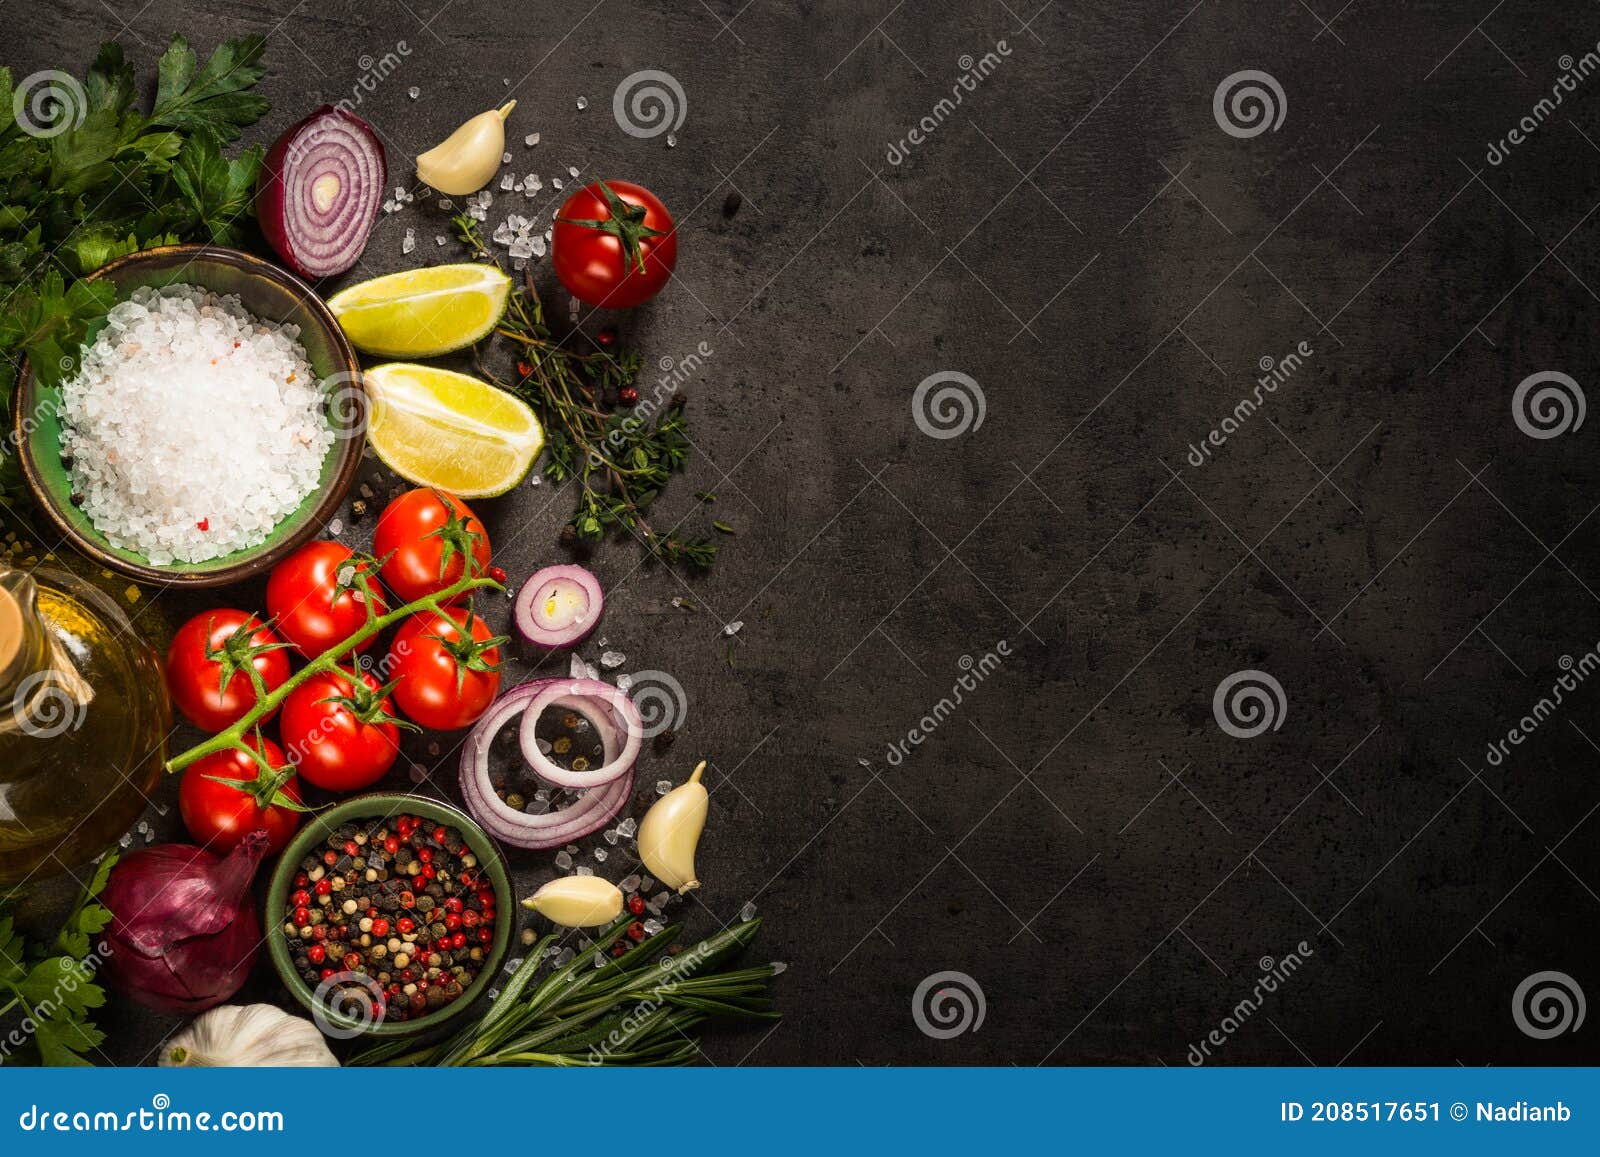 Ingredients for Cooking at Black Table. Stock Image - Image of cooking ...